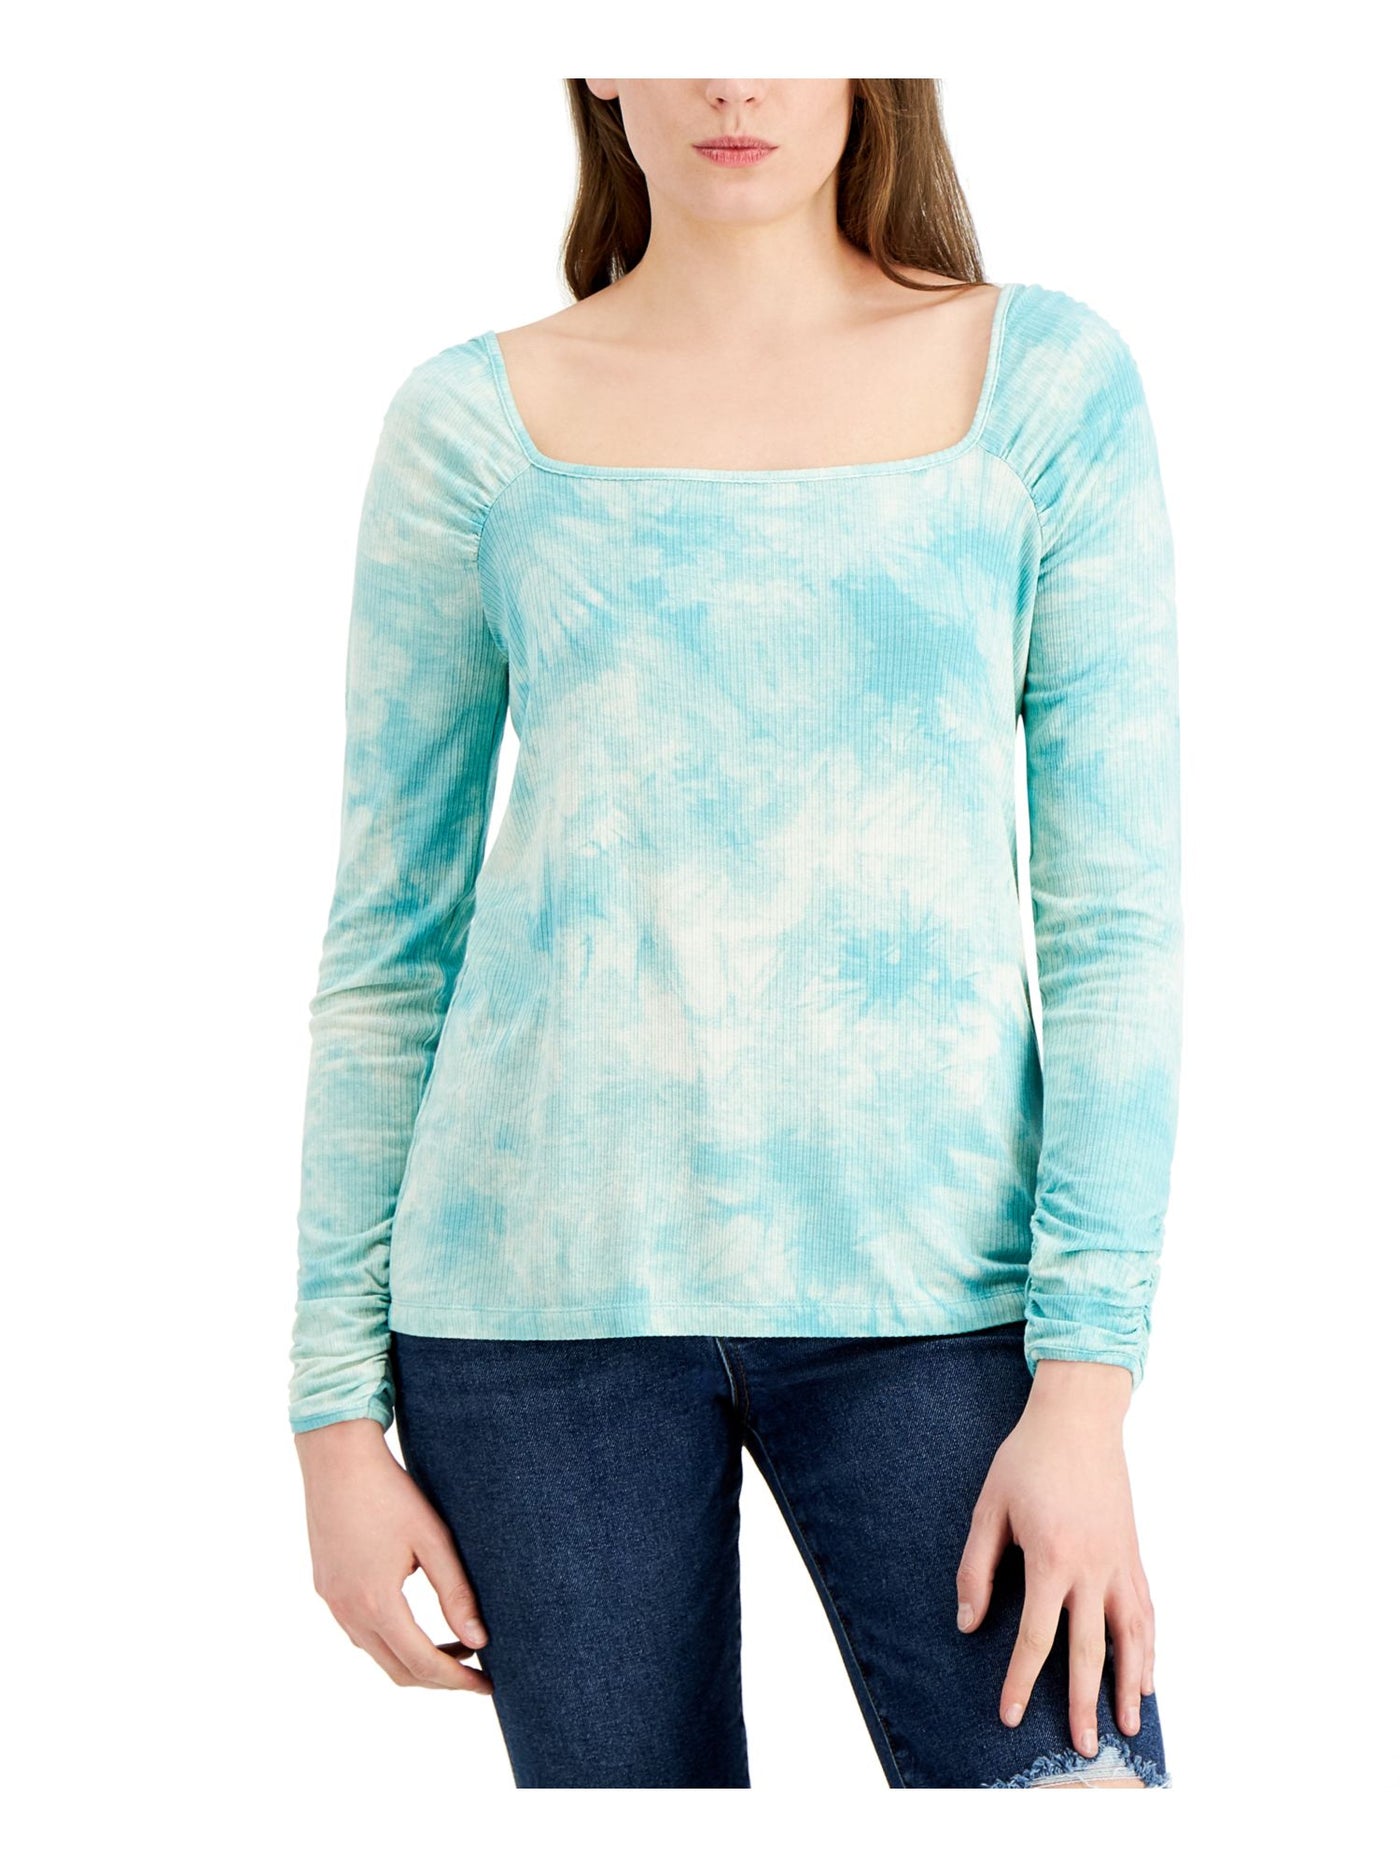 FEVER Womens Green Ribbed Tie Dye Long Sleeve Square Neck Top XS